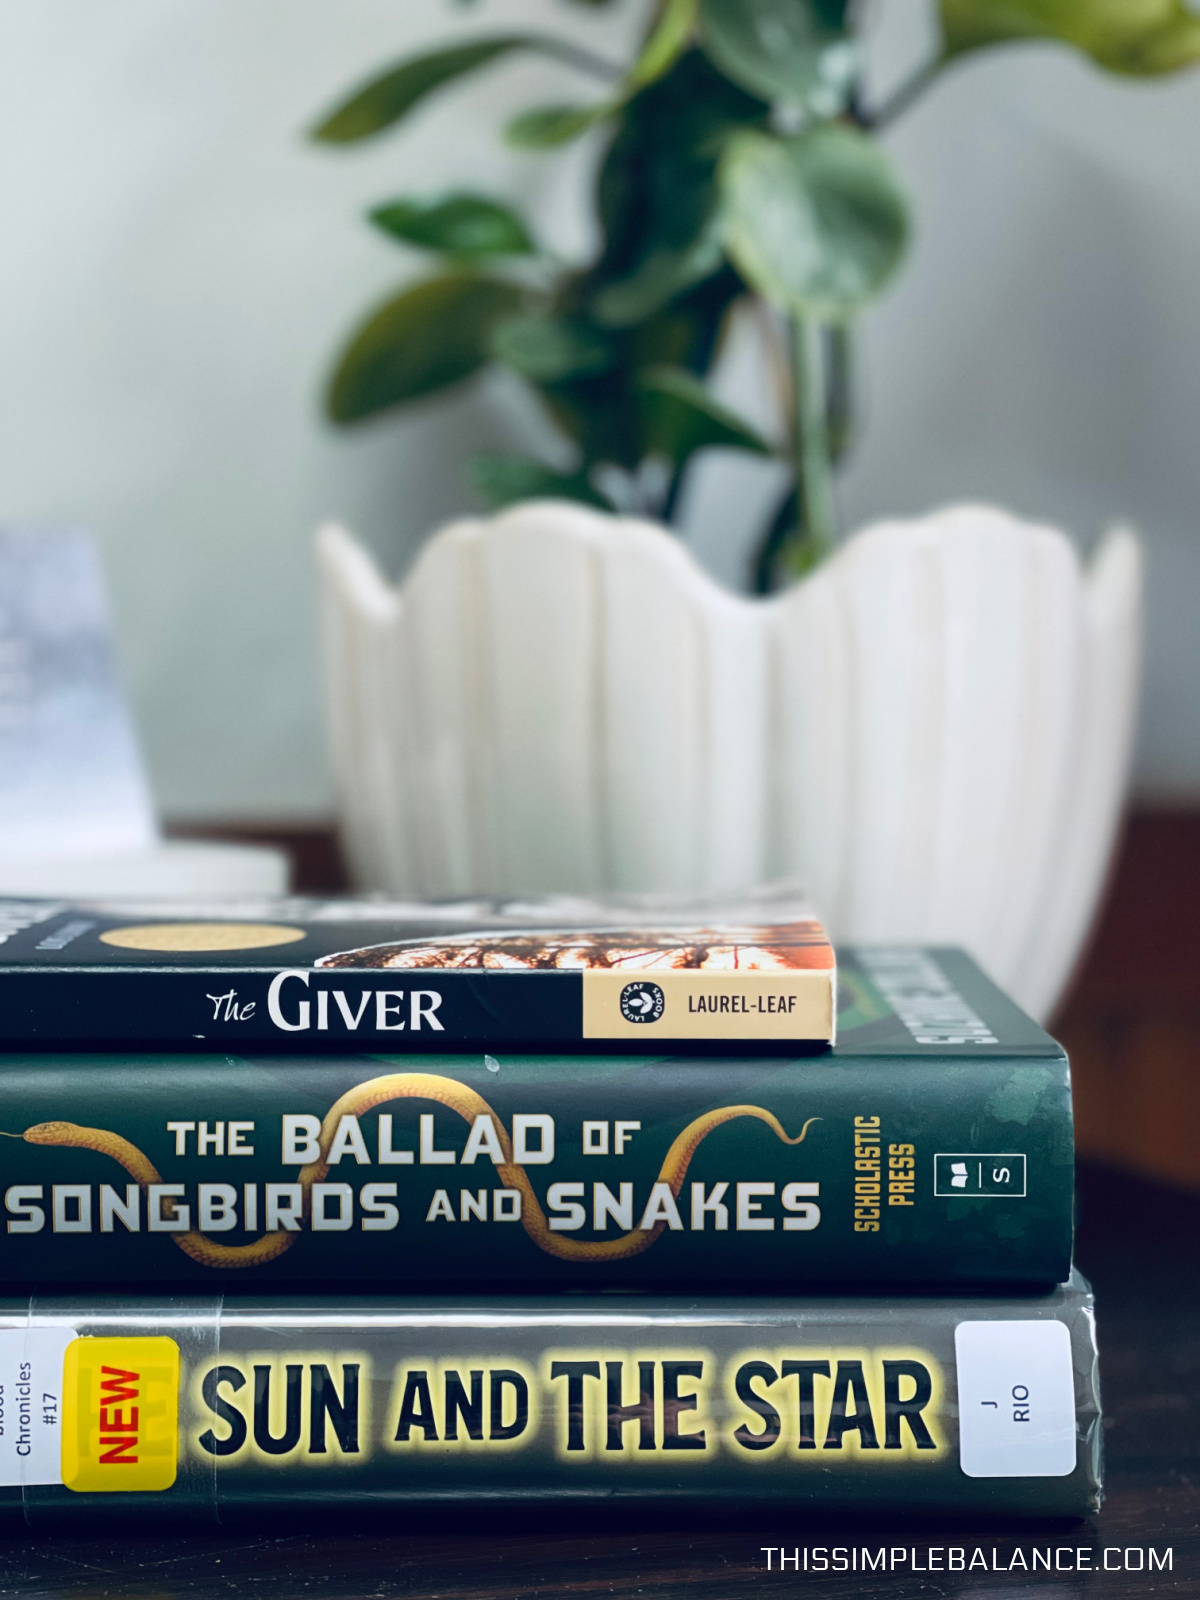 The Giver, The Ballad of Songbirds and Snakes and The Sun and the Star books on a table.